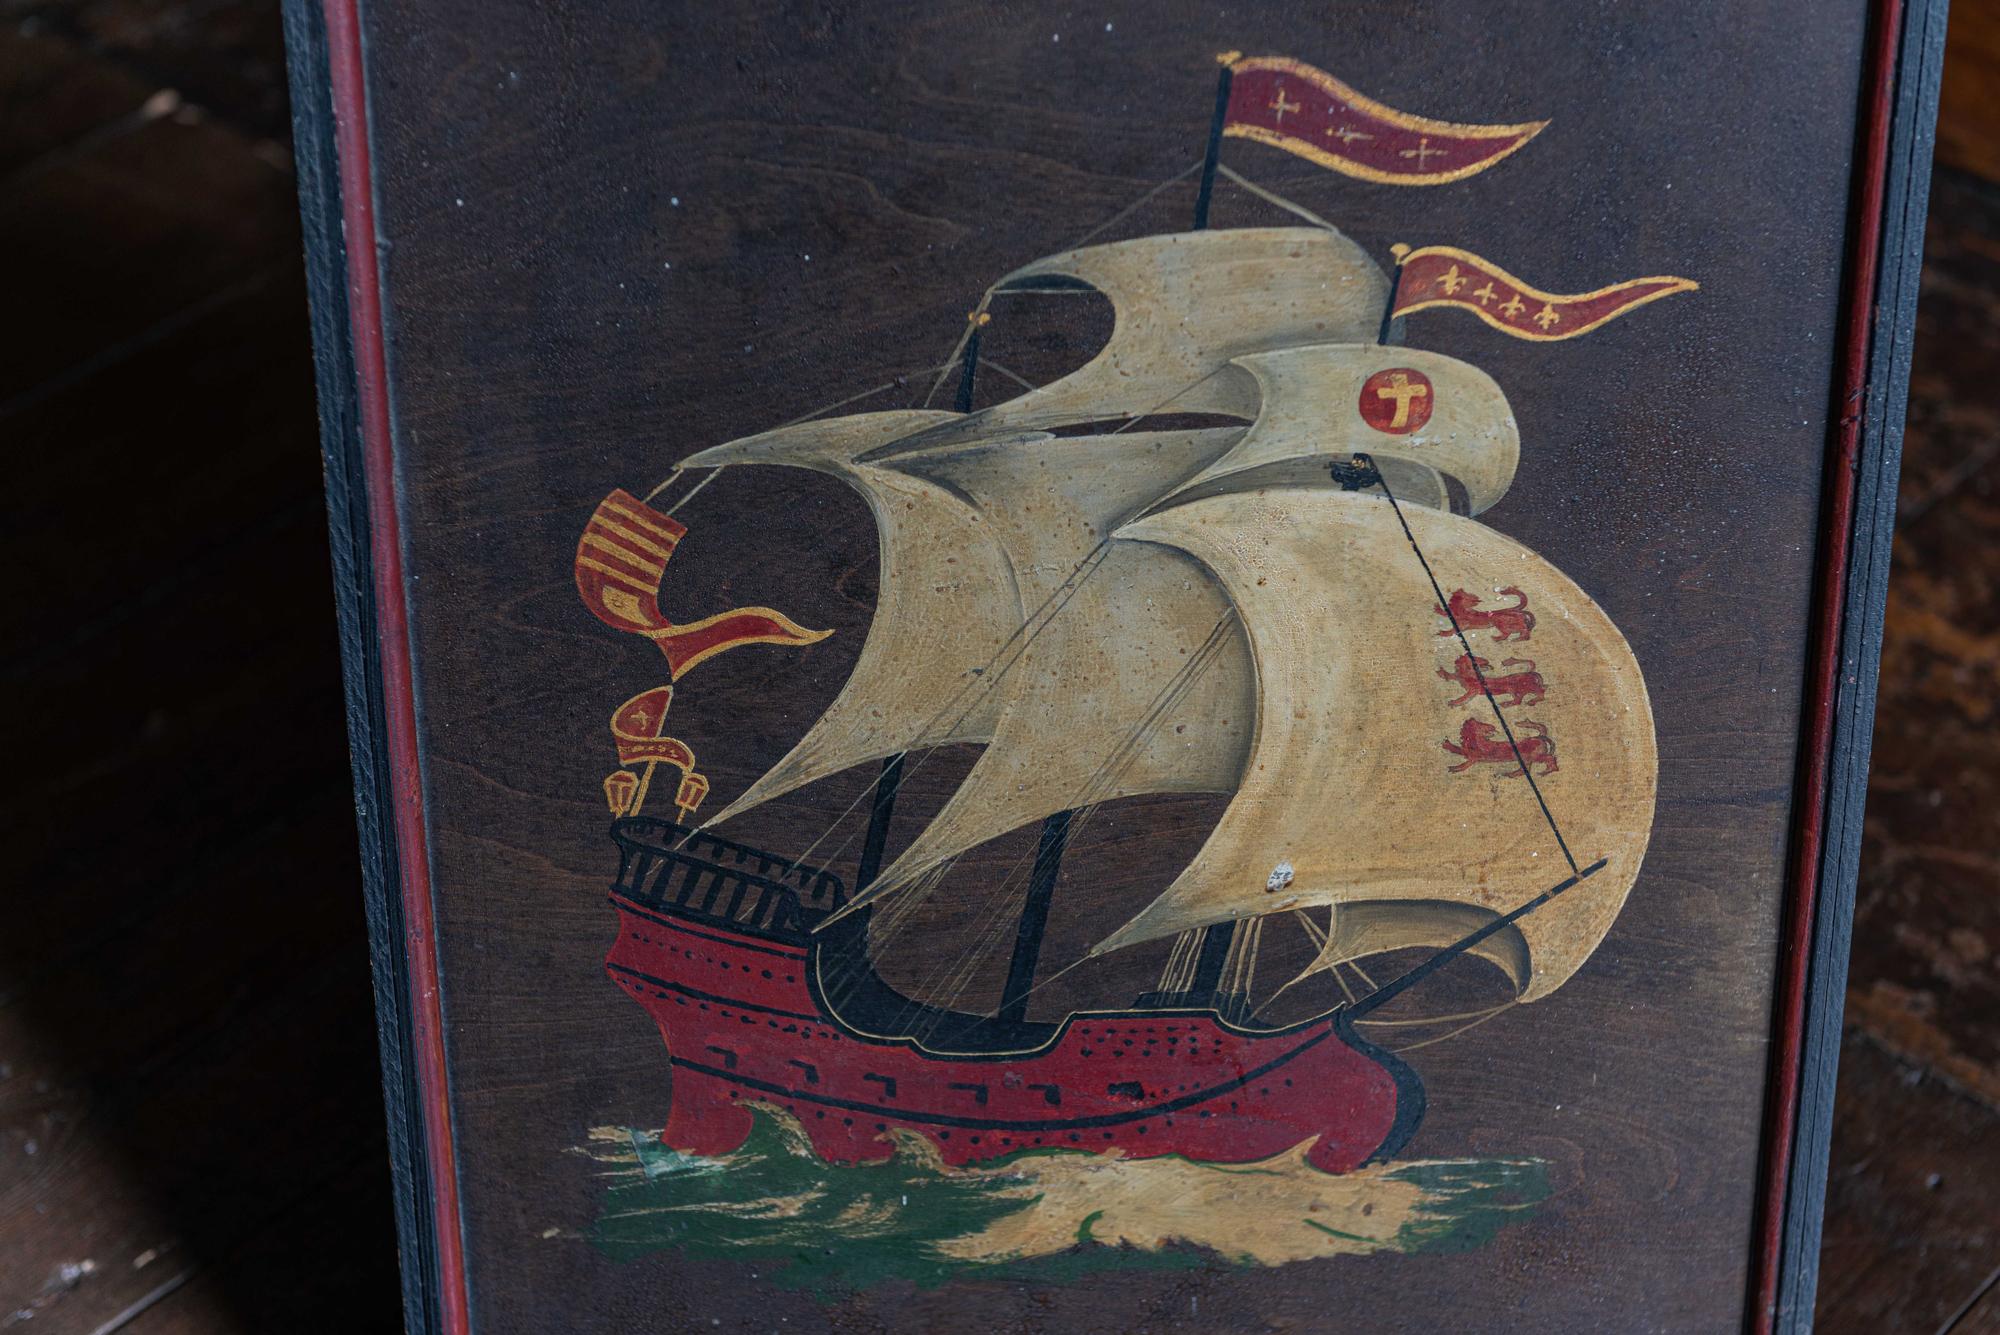 Naive oil on board English Galleon Ship painting
circa 1910.

Decorative oil painting on board of an English galleon with three lions on the sail - affixed to an easel stand. Great color and craquelure patination.

Measures: 63 H x 46 W x 2 D